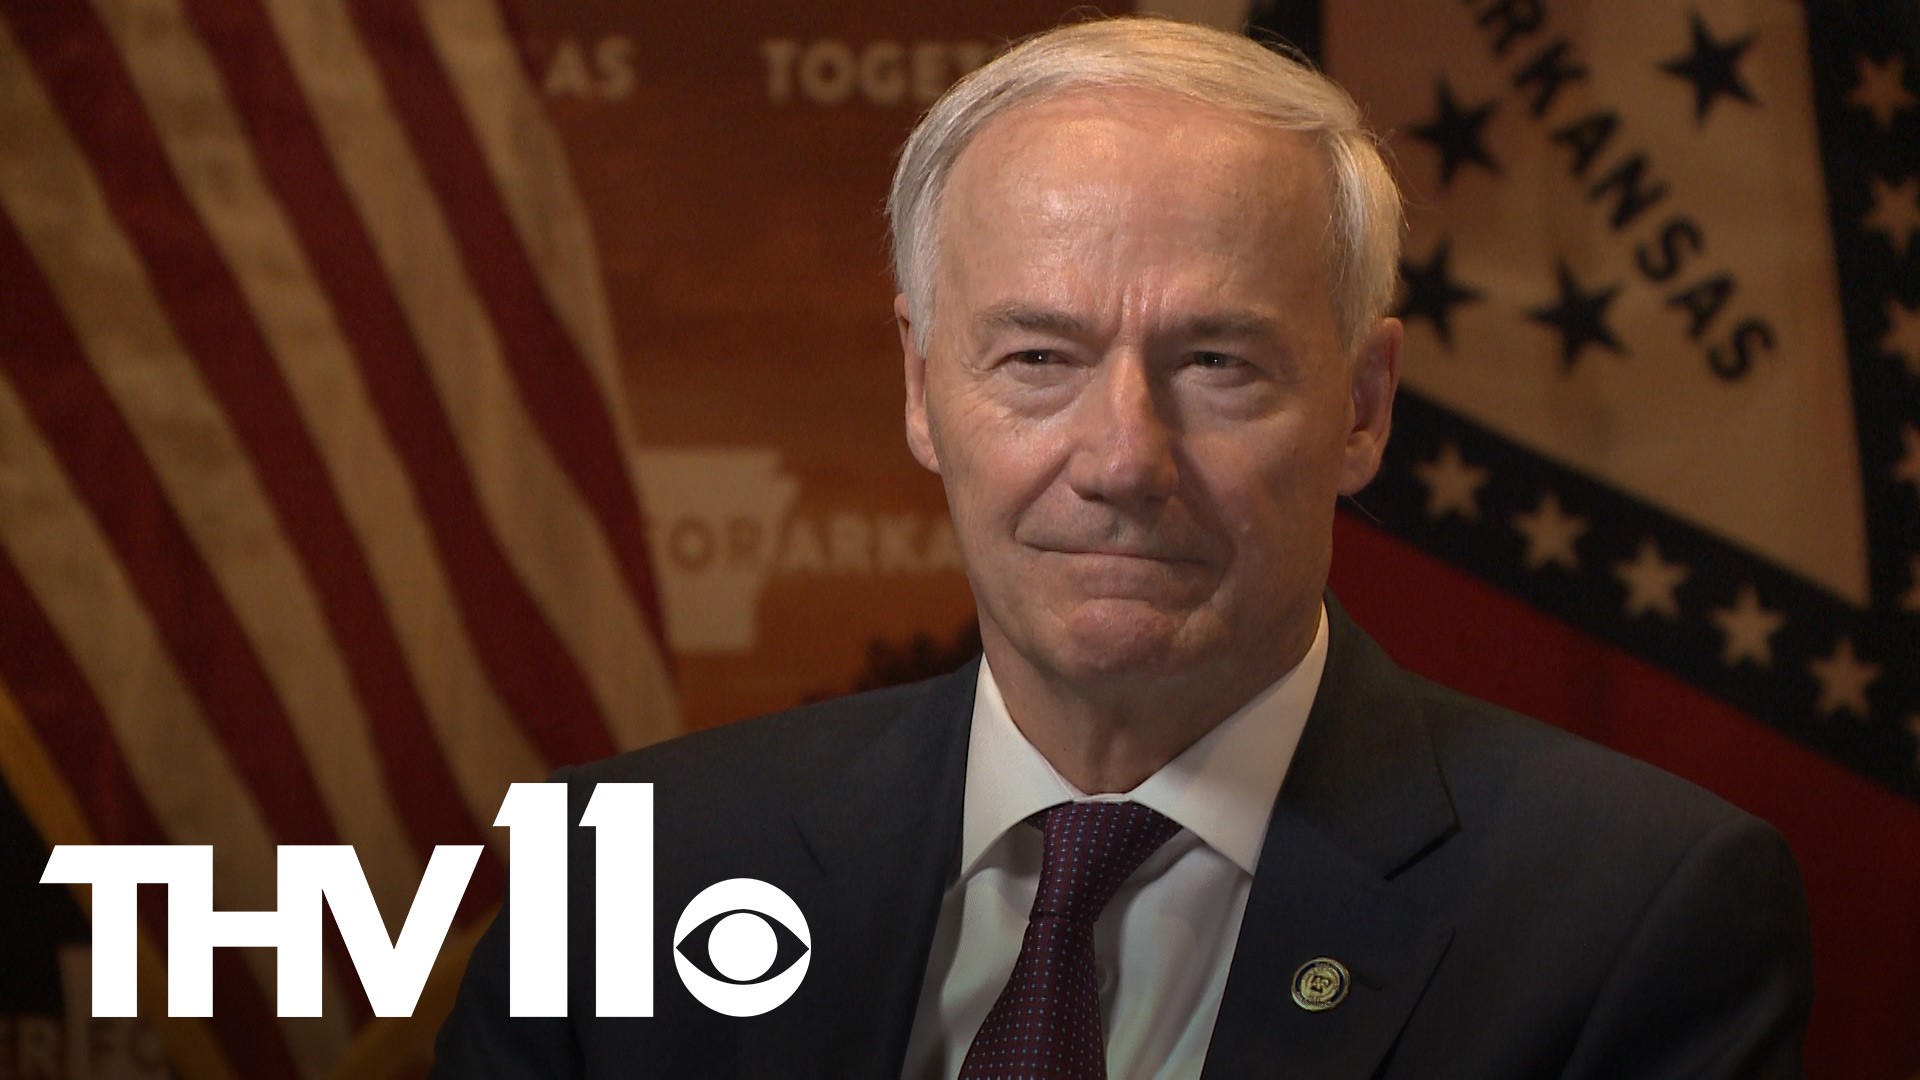 Governors around the nation, with Gov. Asa Hutchinson serving as the group's chairman, are forming a bipartisan working group to address possible gun reform.